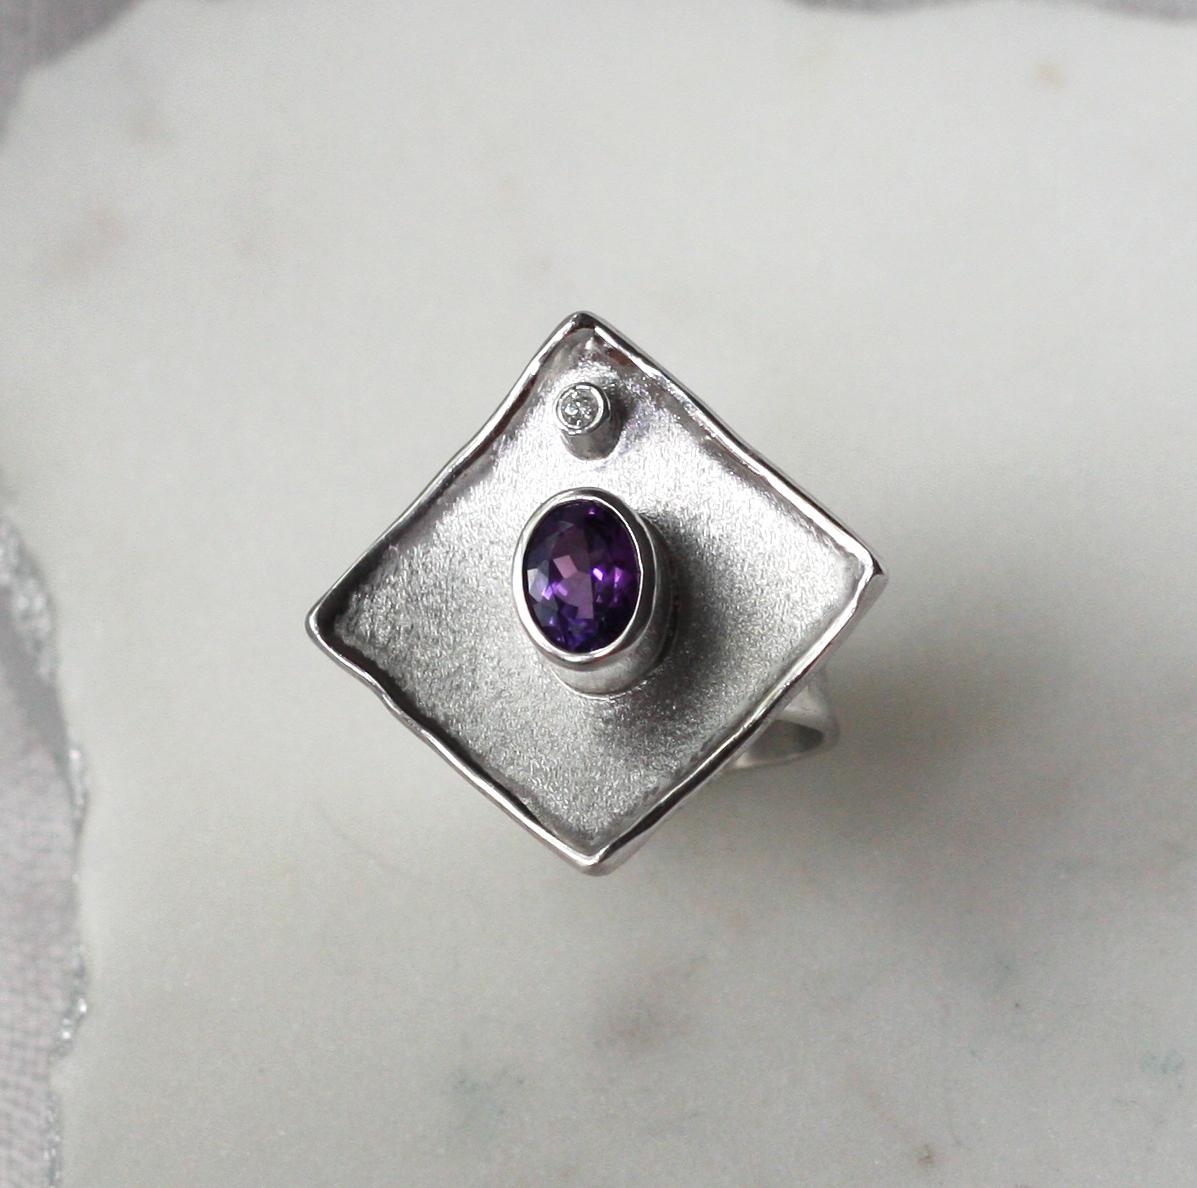 This Yianni Creations handmade band ring from Ammos Collection is 100% handcrafted in Greece from Fine silver 950 purity and plated with palladium to resist the elements. The stunning ring features a 1.25 Carat Amethyst oval cut complimented by a